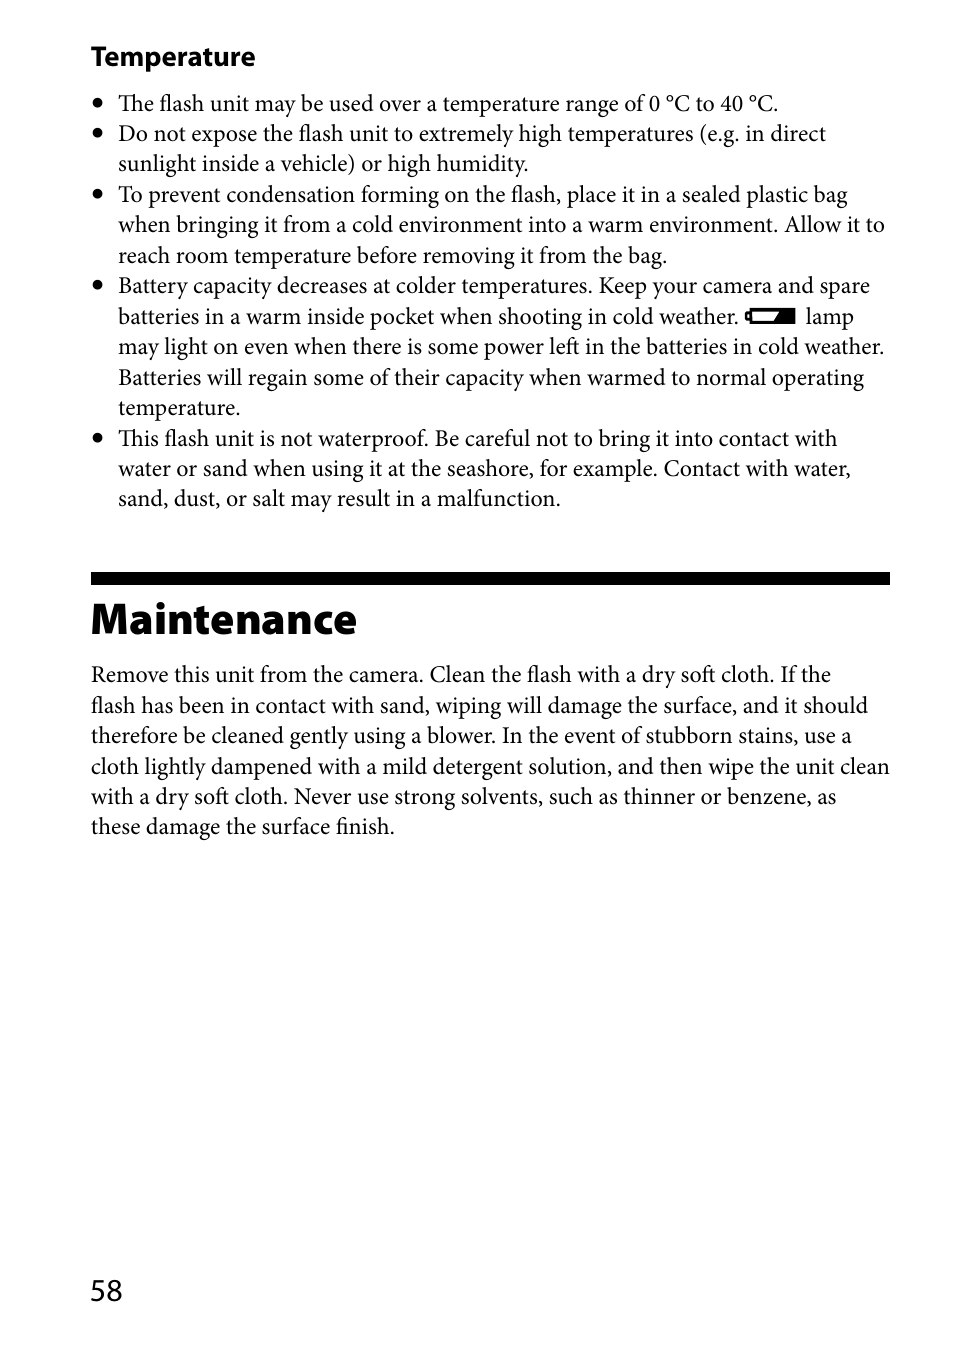 Maintenance, Temperature | Sony HVL-MT24AM User Manual | Page 58 / 295